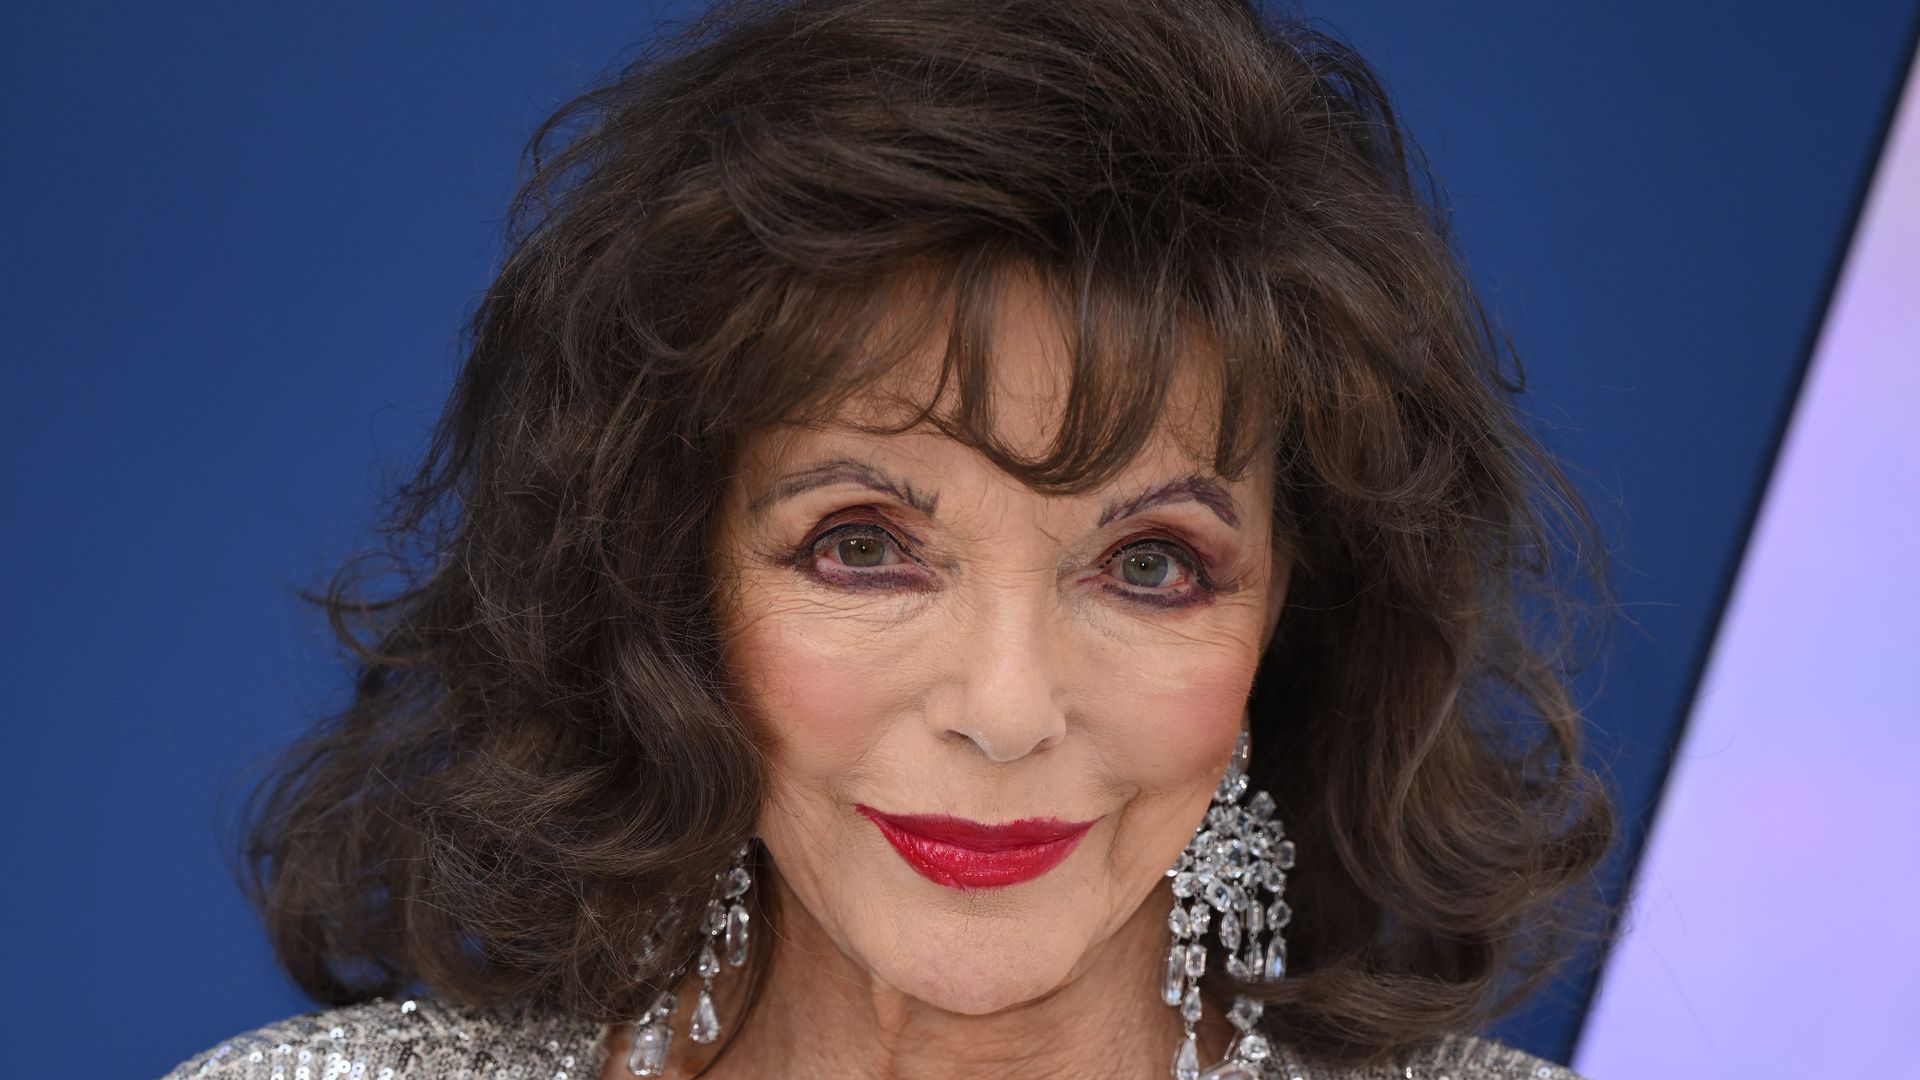 Joan Collins has opened up about her excitement over reuniting with her half-siblings